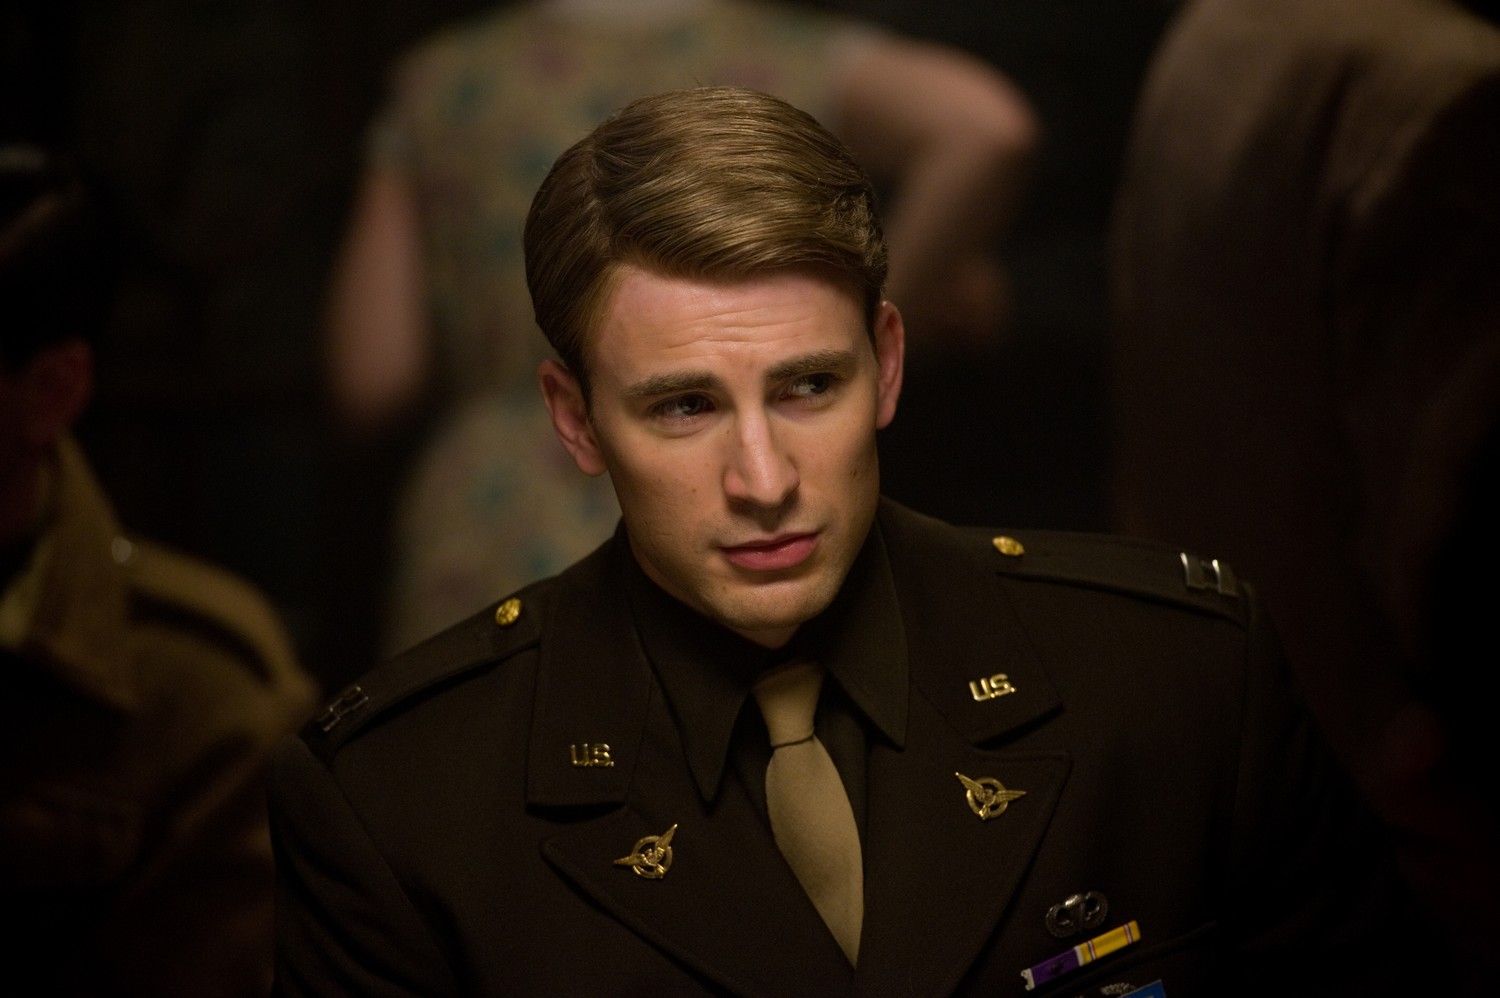 captain america images hd